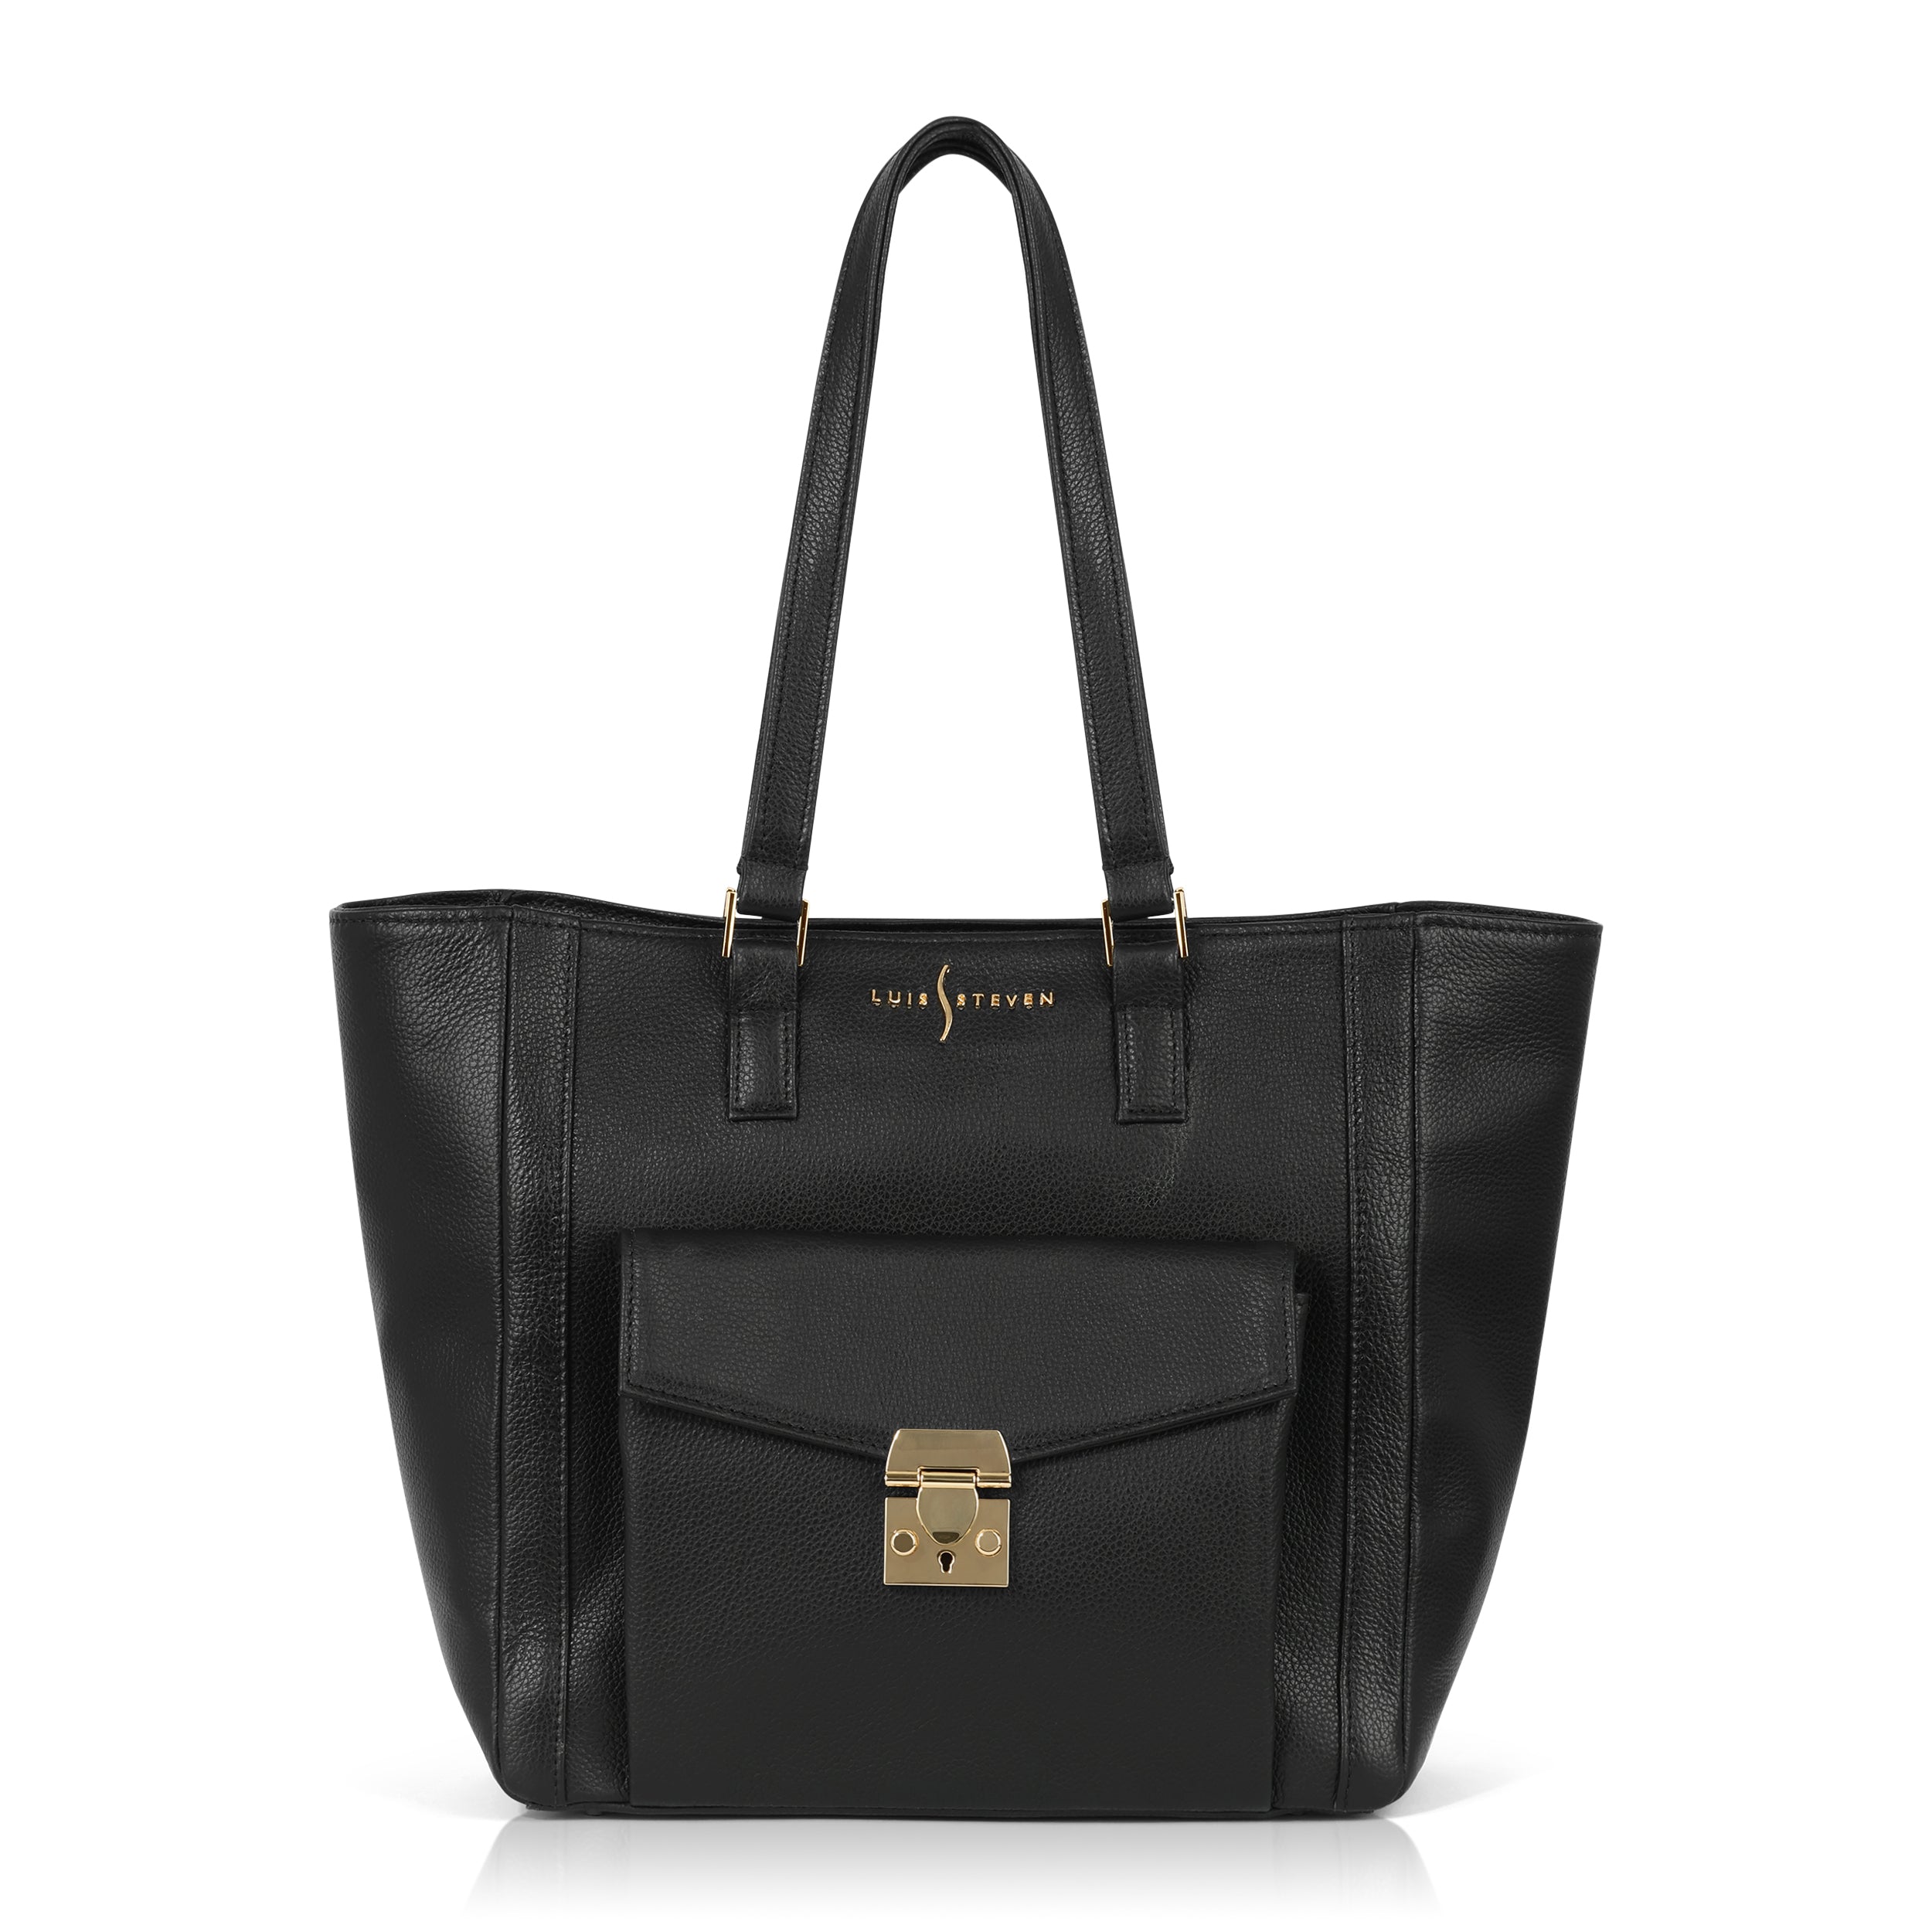 Classic Tote - Black Pebble with Front Pocket